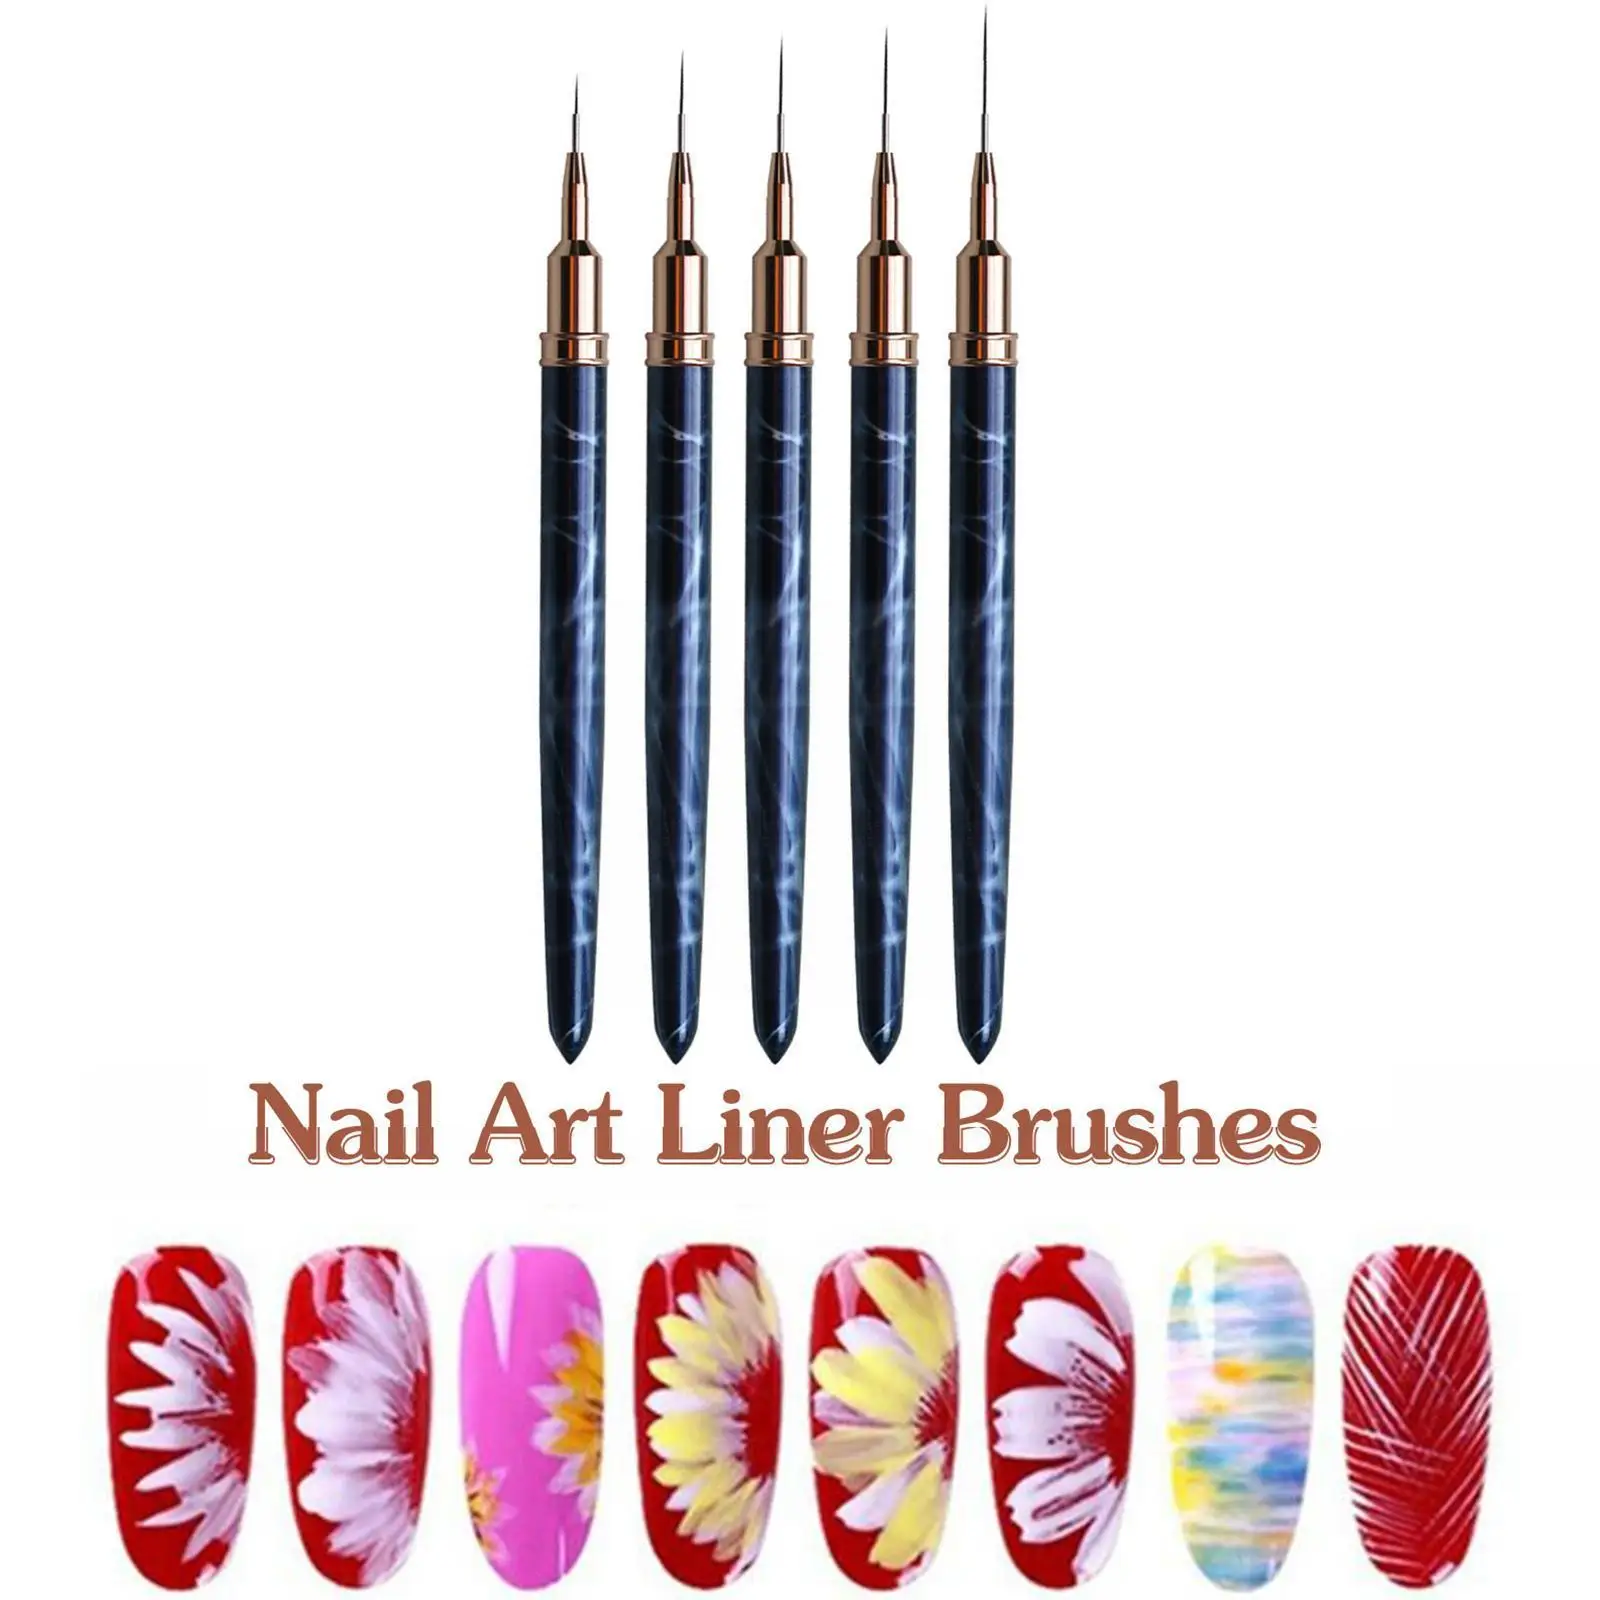 

Nail Art Liner Brushes 7mm 9mm 11mm 15mm 25mm Painting Pen 3d Diy Acrylic Uv Gel Brushes Drawing Kit For Long Lines Black W1r1